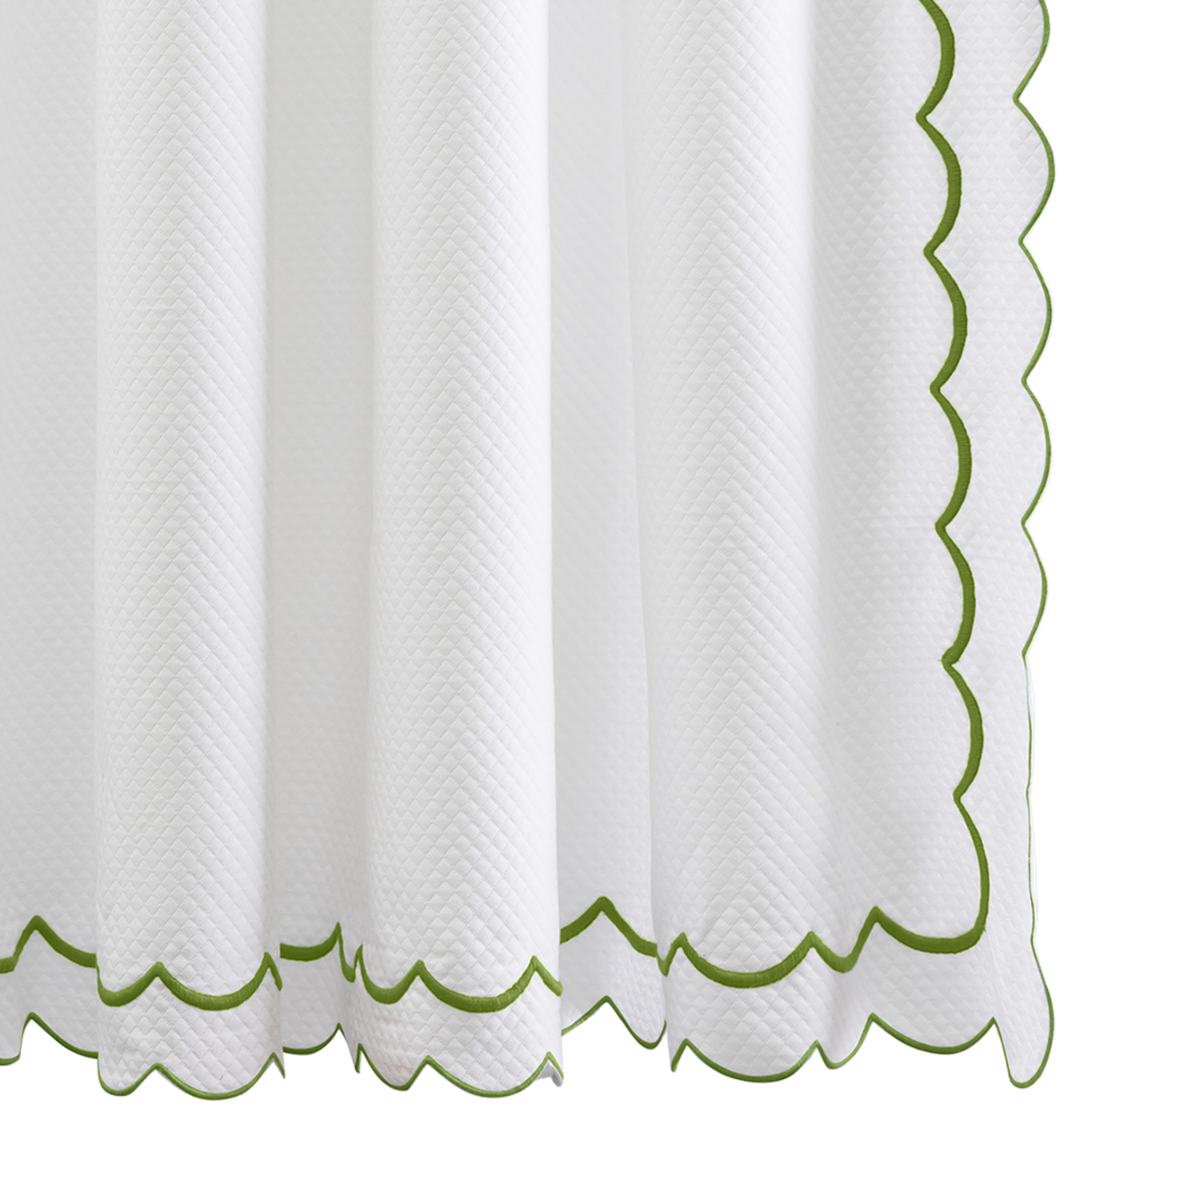 Hanging Edges of Matouk Indie Pique Shower Curtain in Grass Color